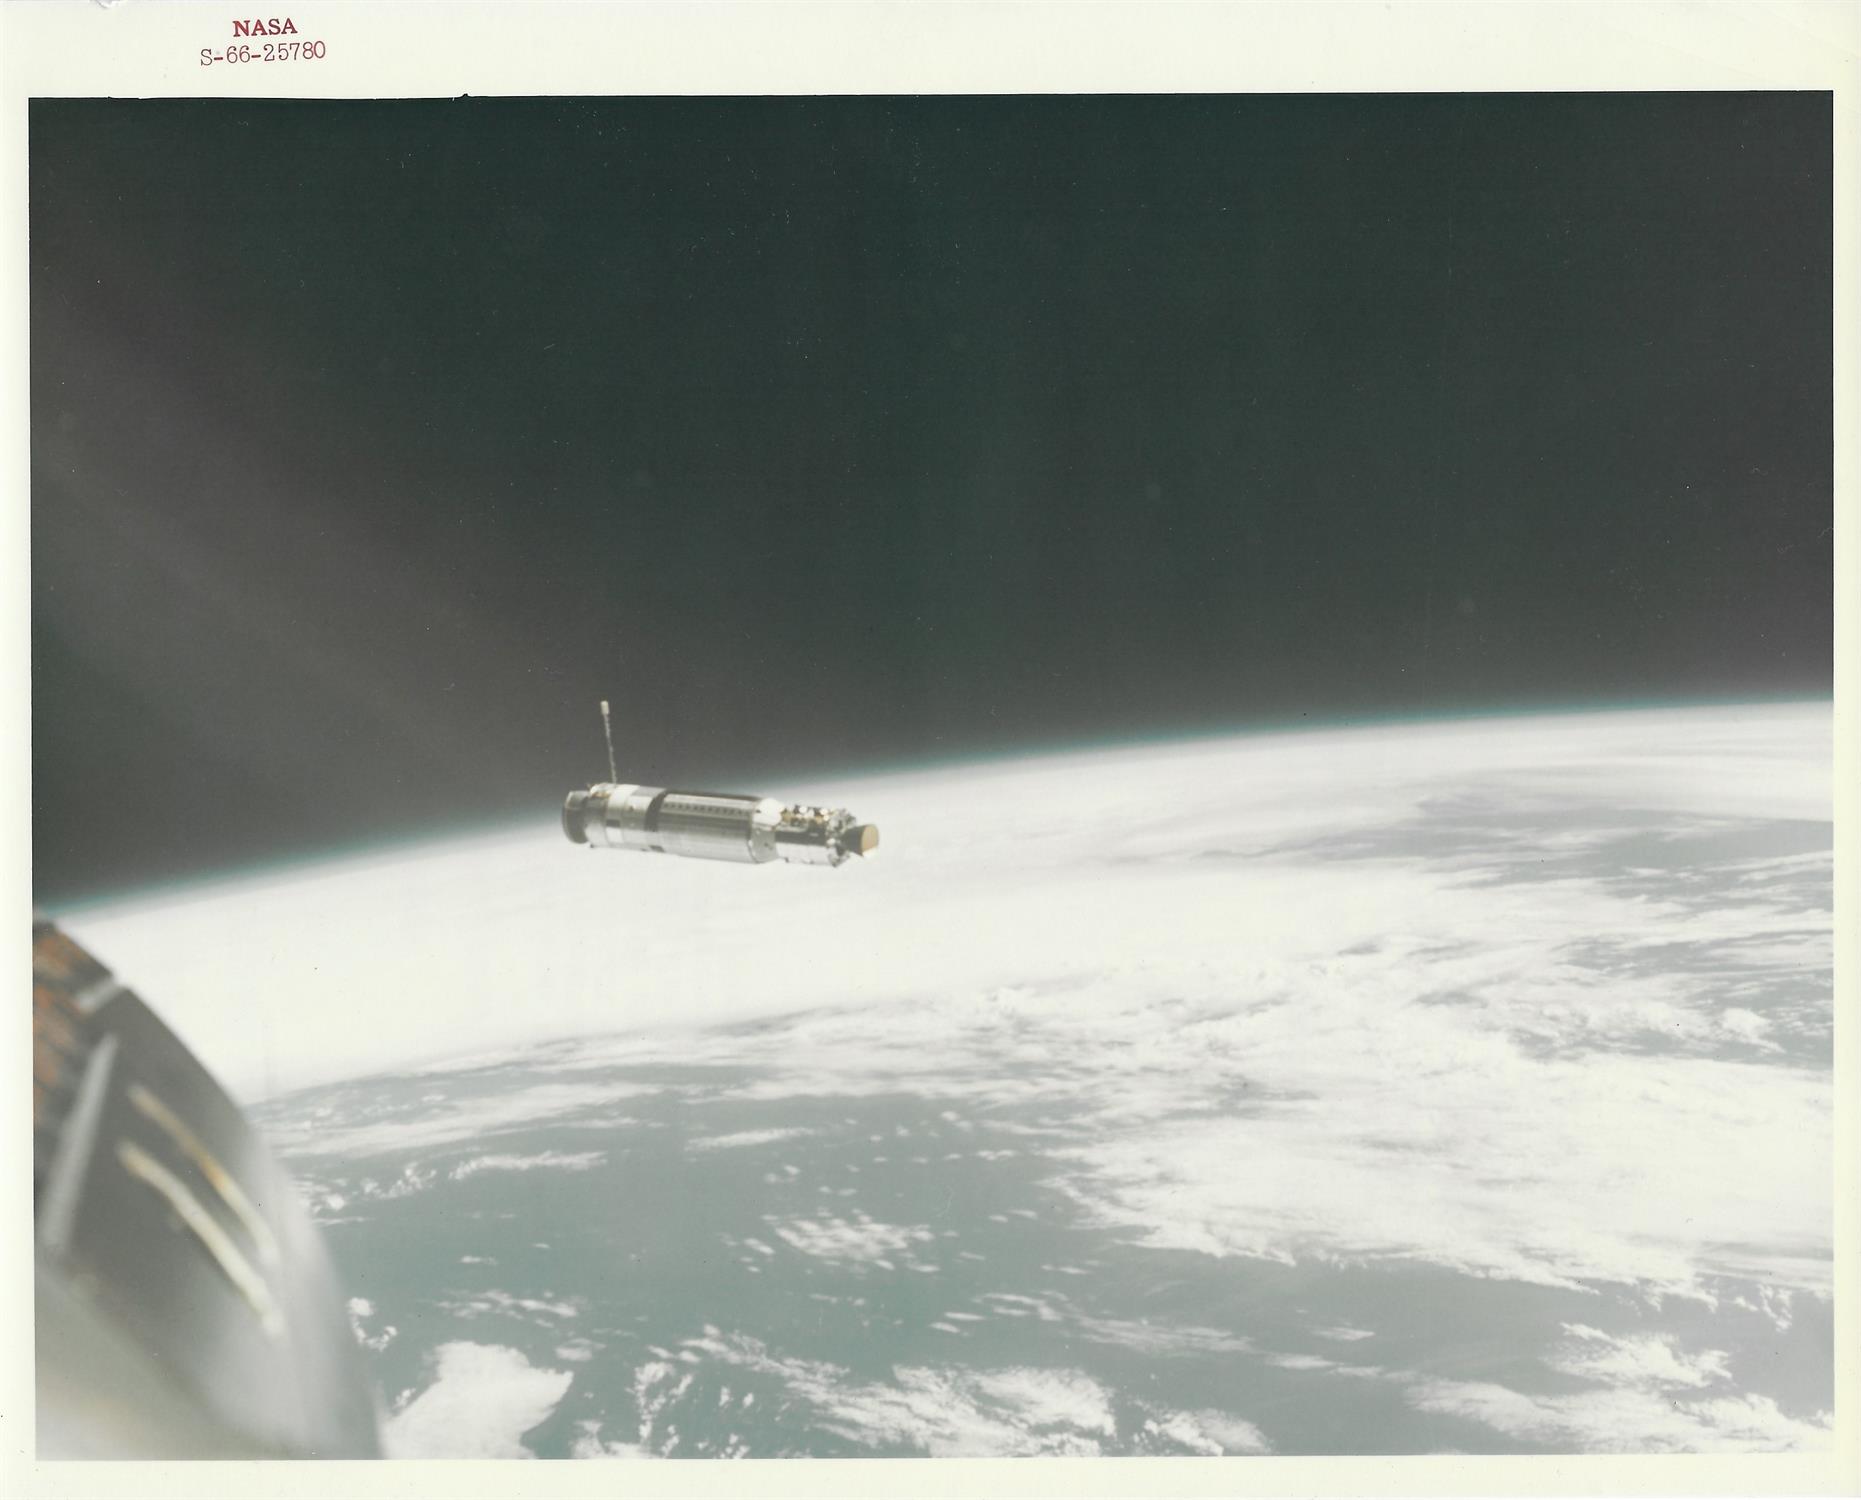 Four views of the Agena Target Docking Vehicle at a decreasing distance, Gemini 8, March 1966 - Image 4 of 9